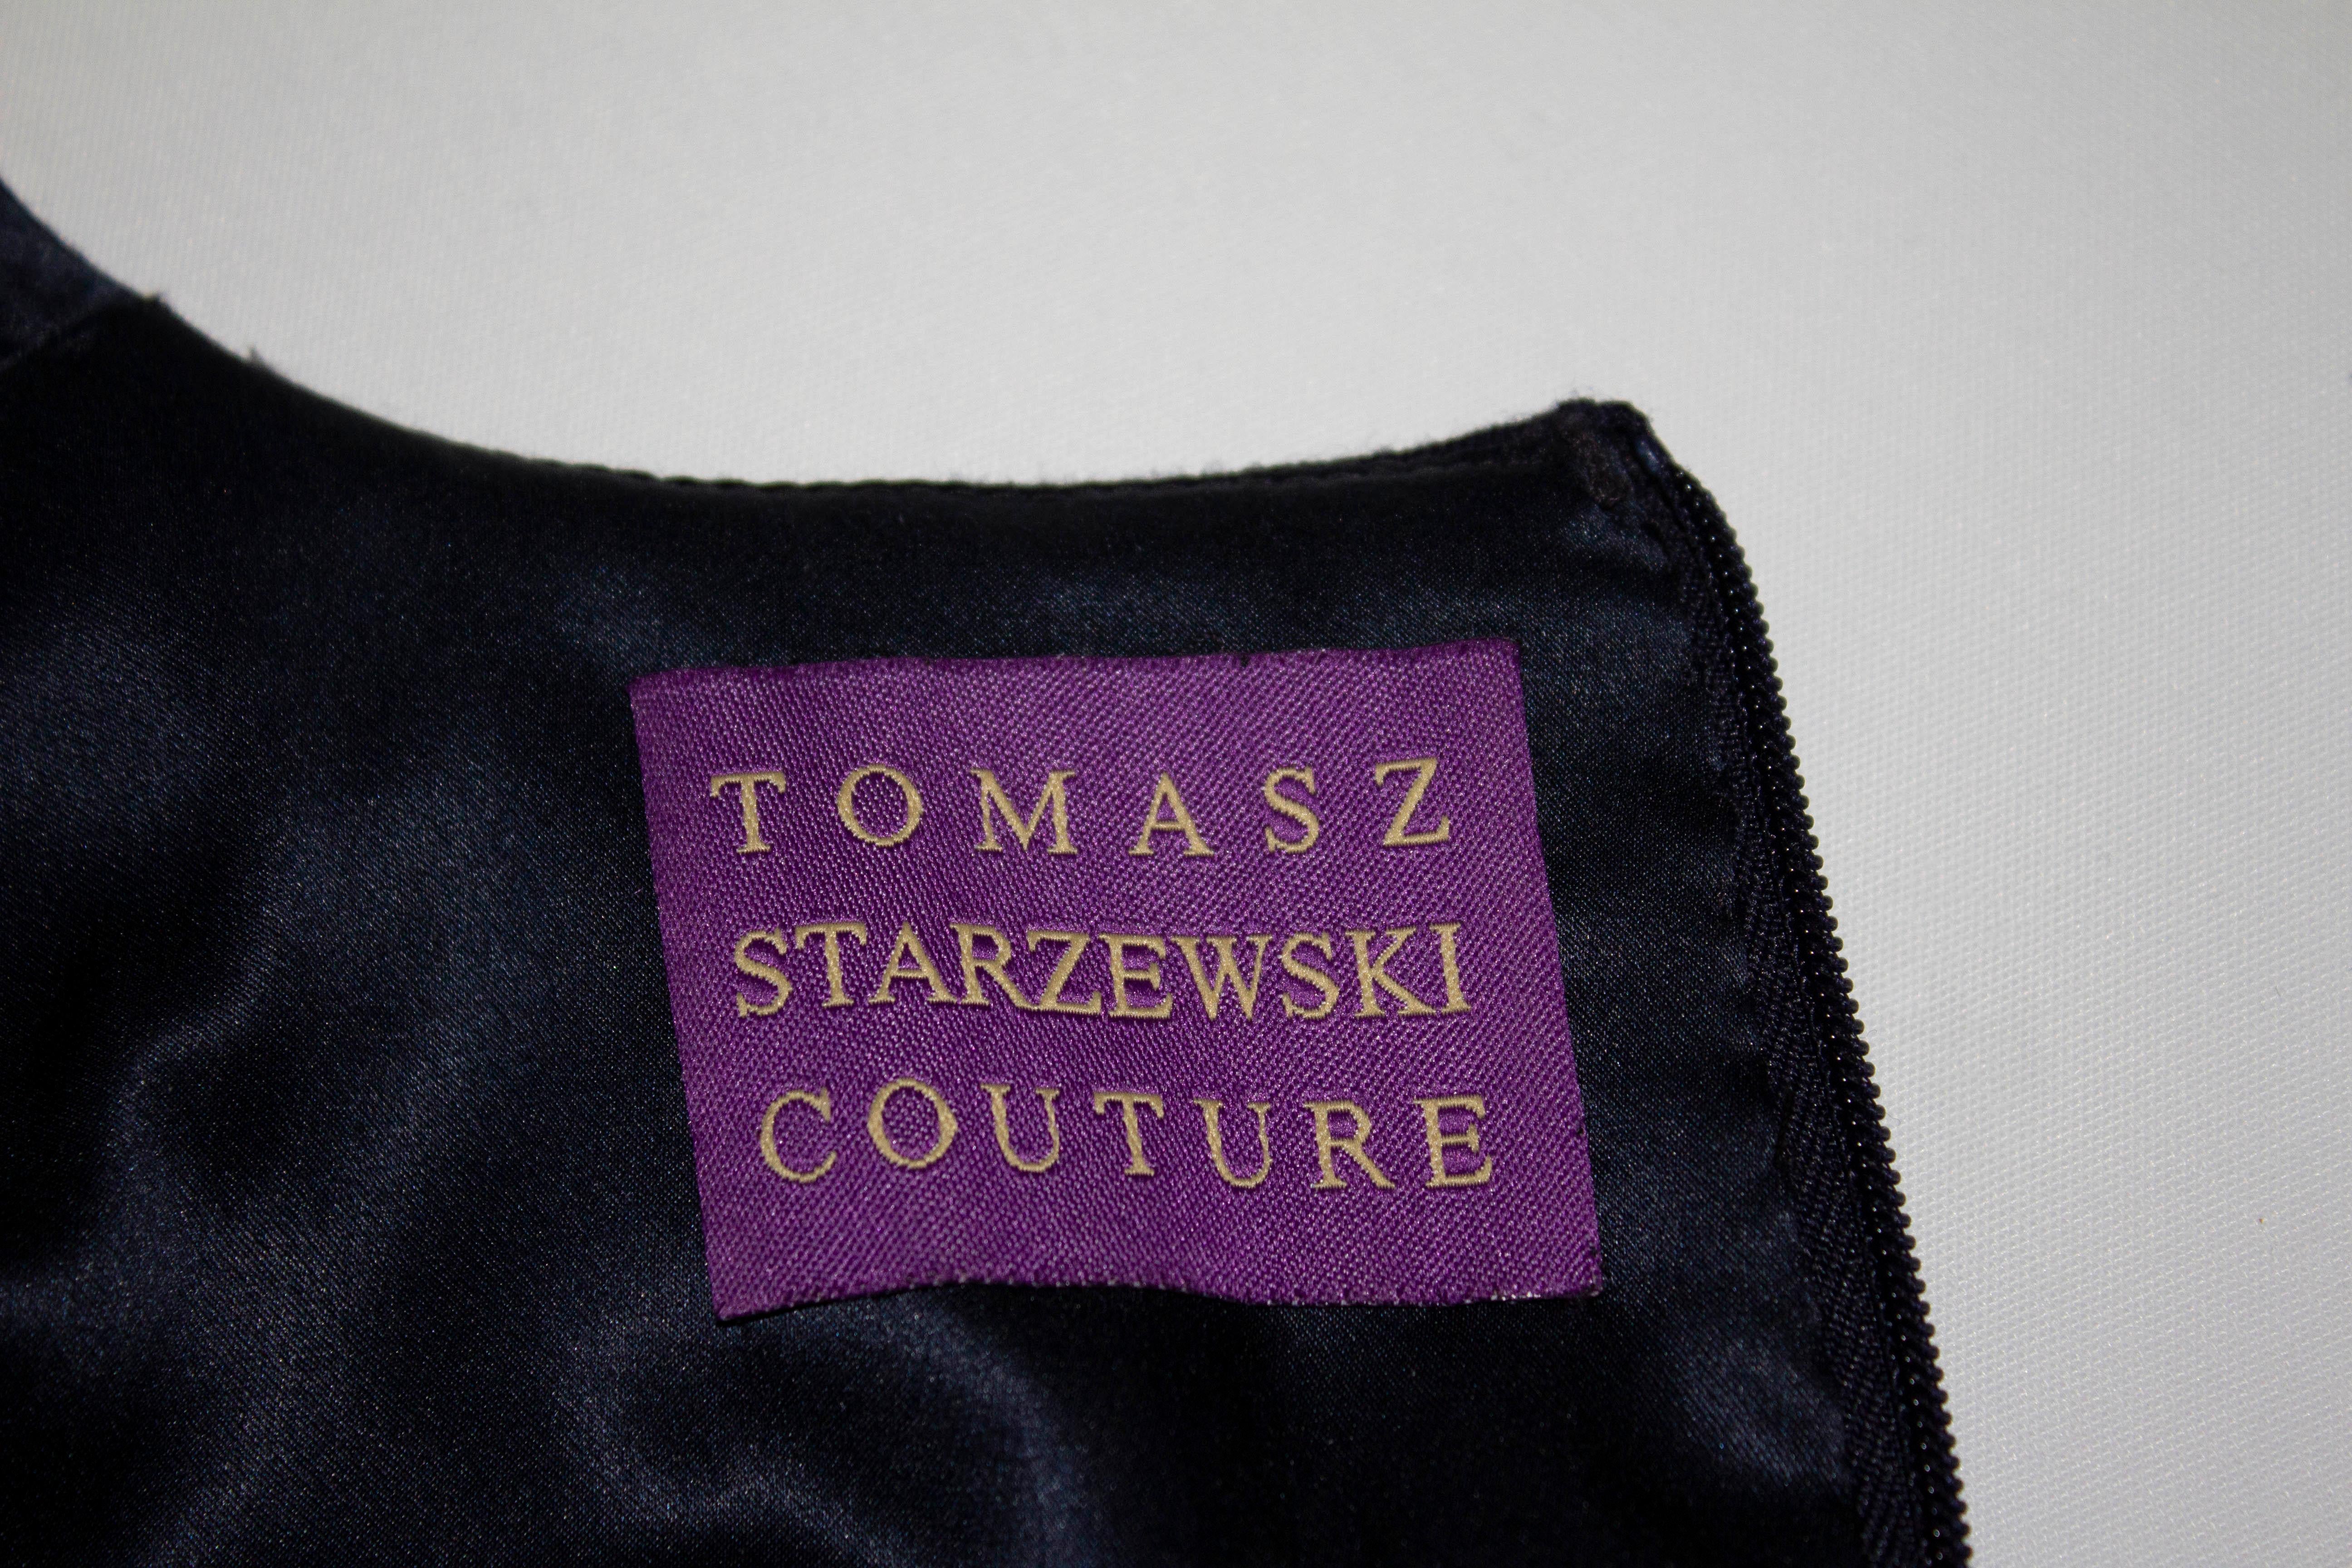 A chic vintage dress by Tomasz Starzewski Couture.  In a deep blue the dress has a knot detail on the front, short sleaves, central back zip and is lined in silk.

Measurements: Bust 36'', length 44''